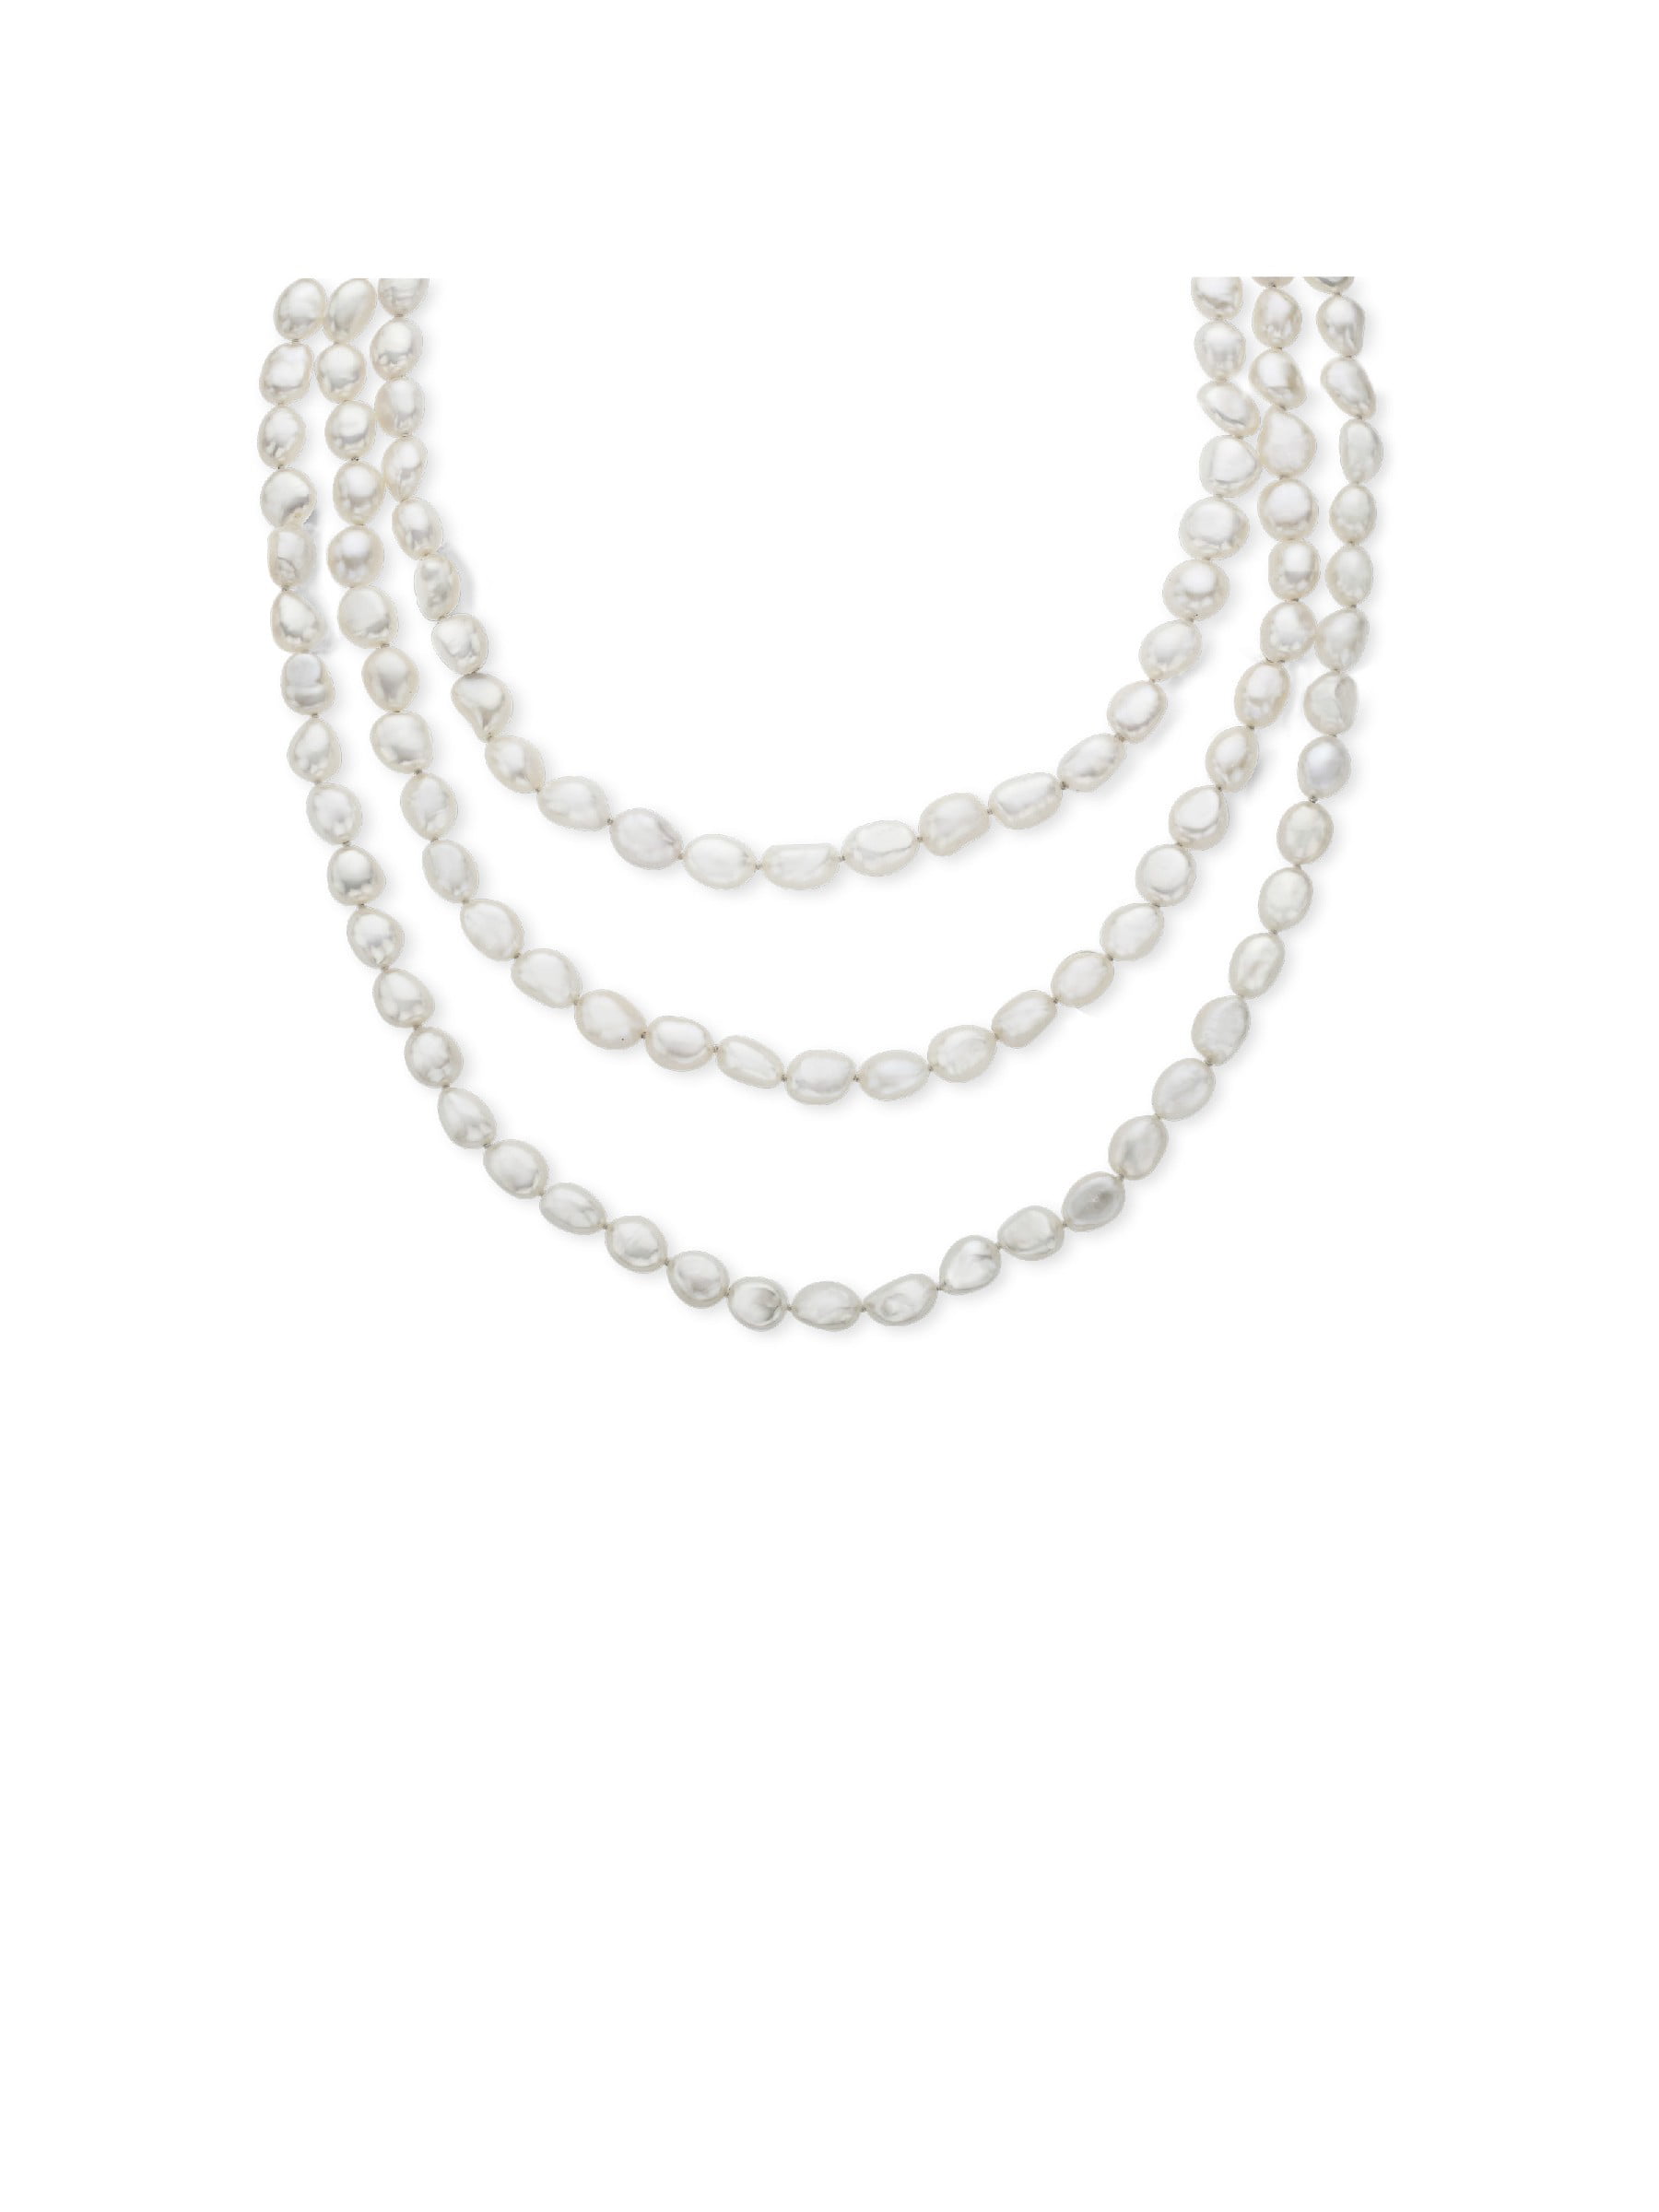 JYX Pearl Long Strand Necklace 6.5mm Natural White Round Freshwater Pearl Necklace Long Swaeter Necklace 63